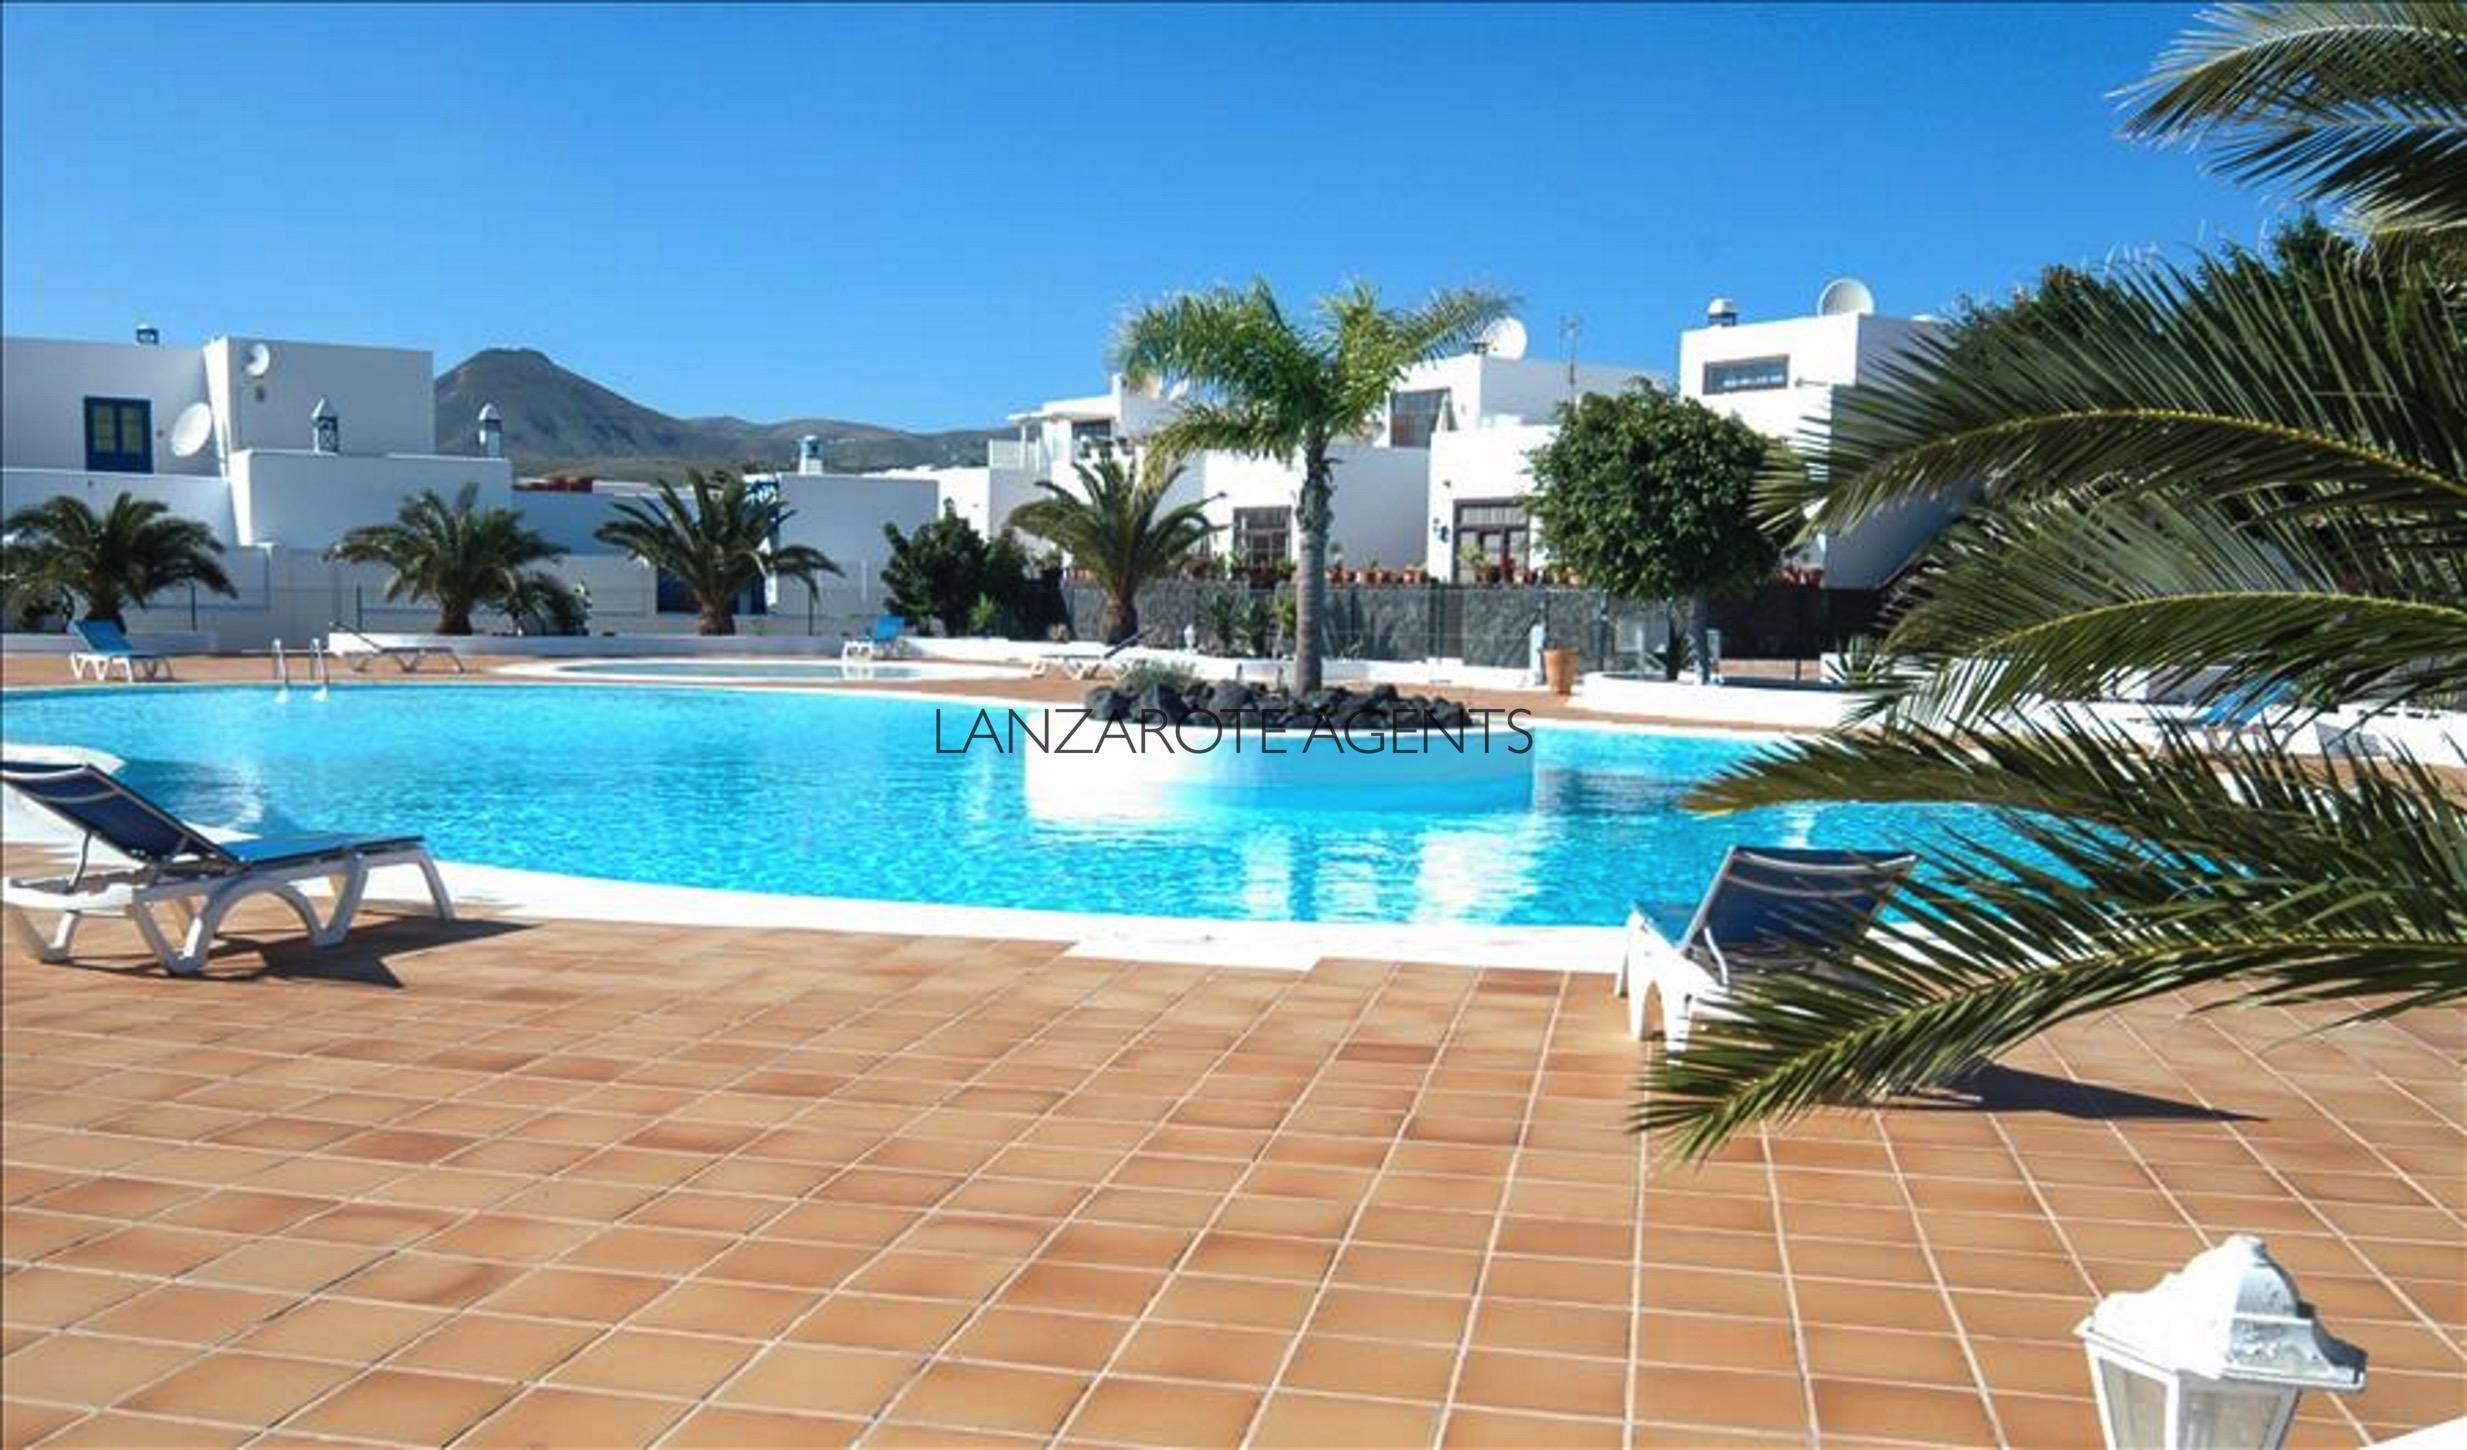 Lovely Terraced 3 Bedroom Villa in Puerto Calero on a Complex with Communal Pool